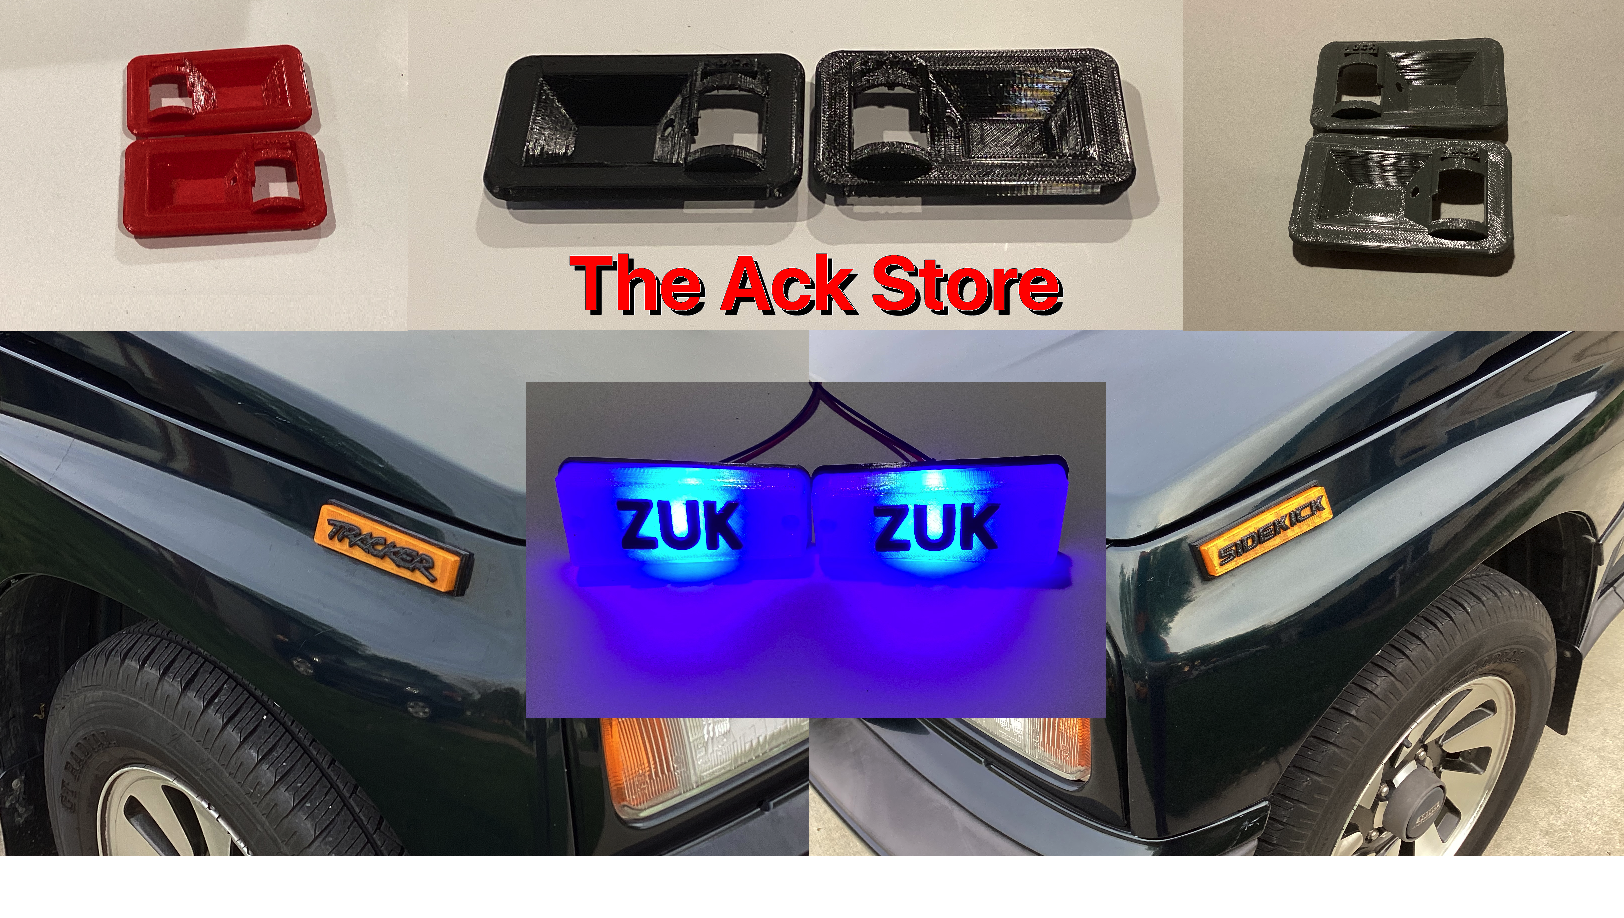 The Ack Store